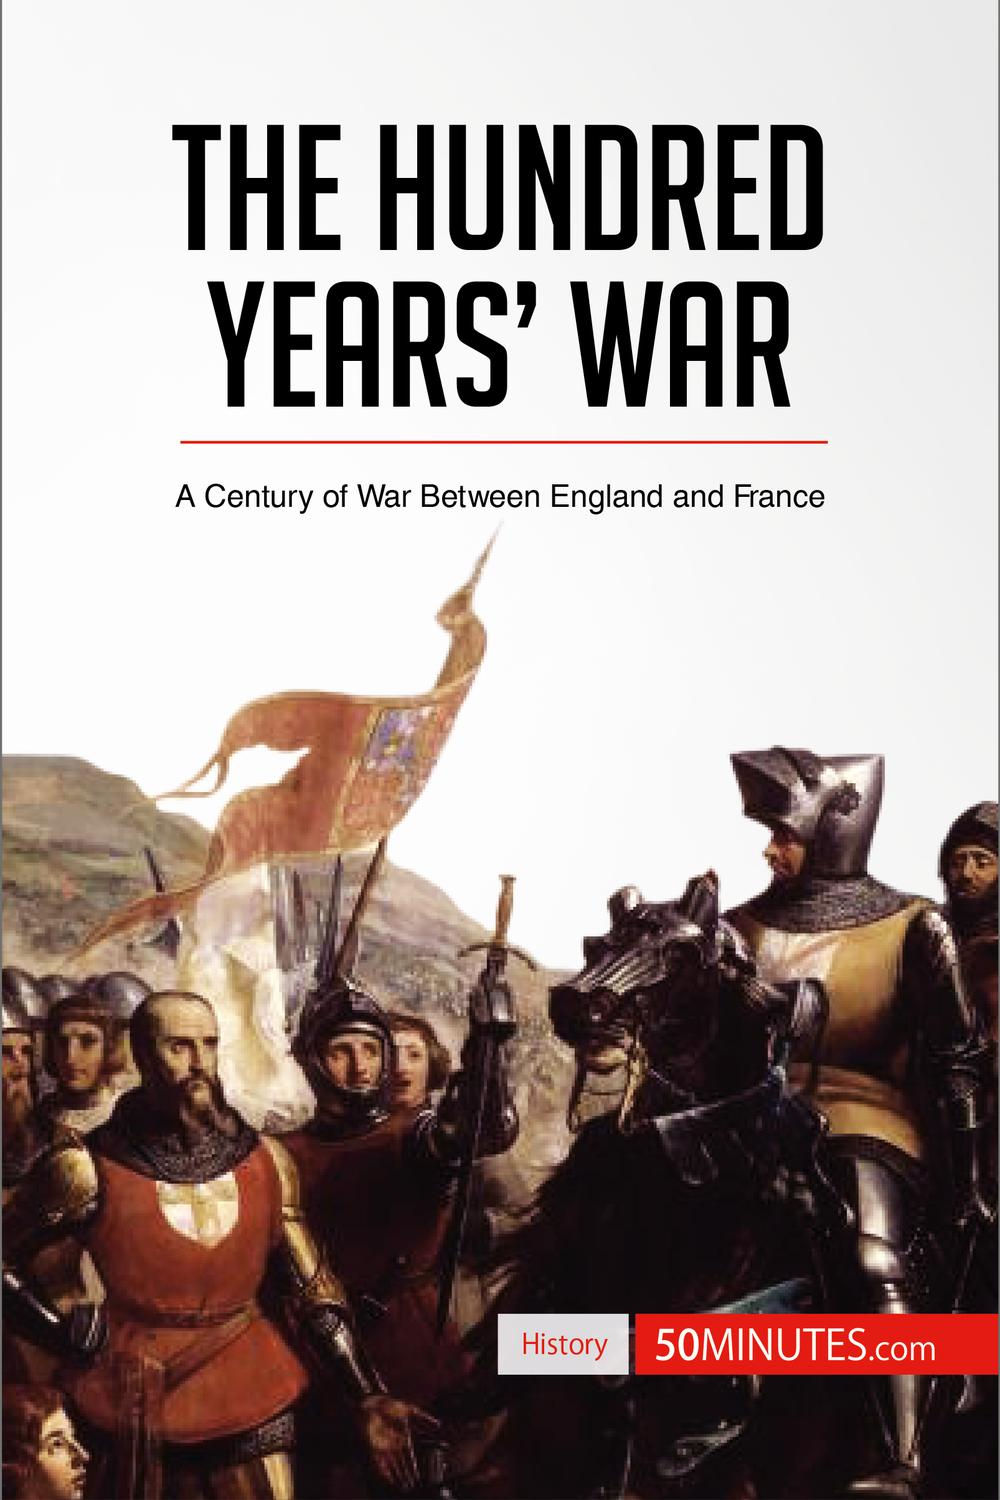 The Hundred Years' War - 50MINUTES,,